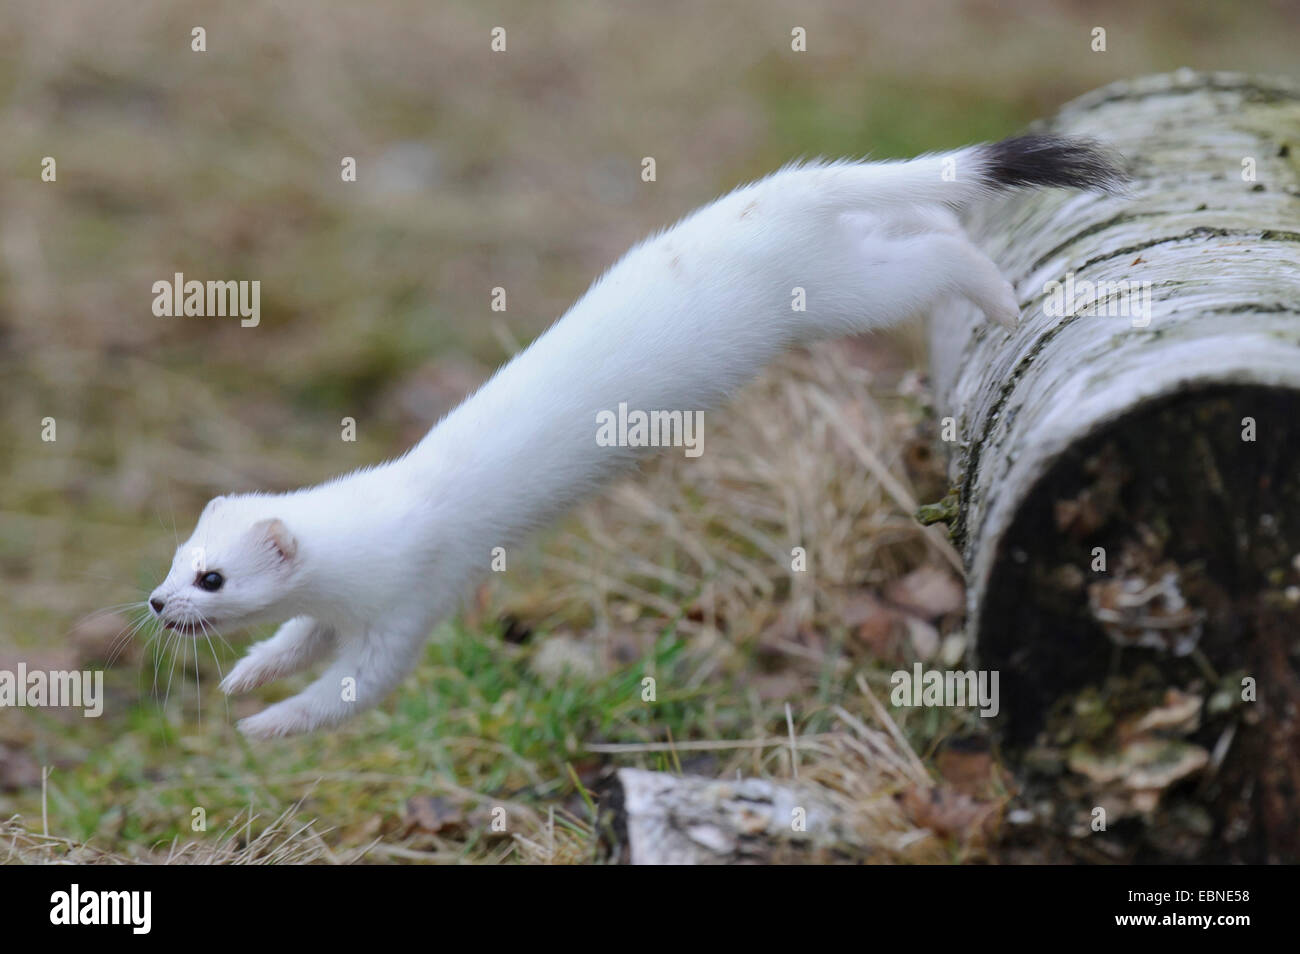 Ermine, Stoat, Short-tailed weasel (Mustela erminea), in winter coat, jumping from a dead tree trunk, Germany Stock Photo